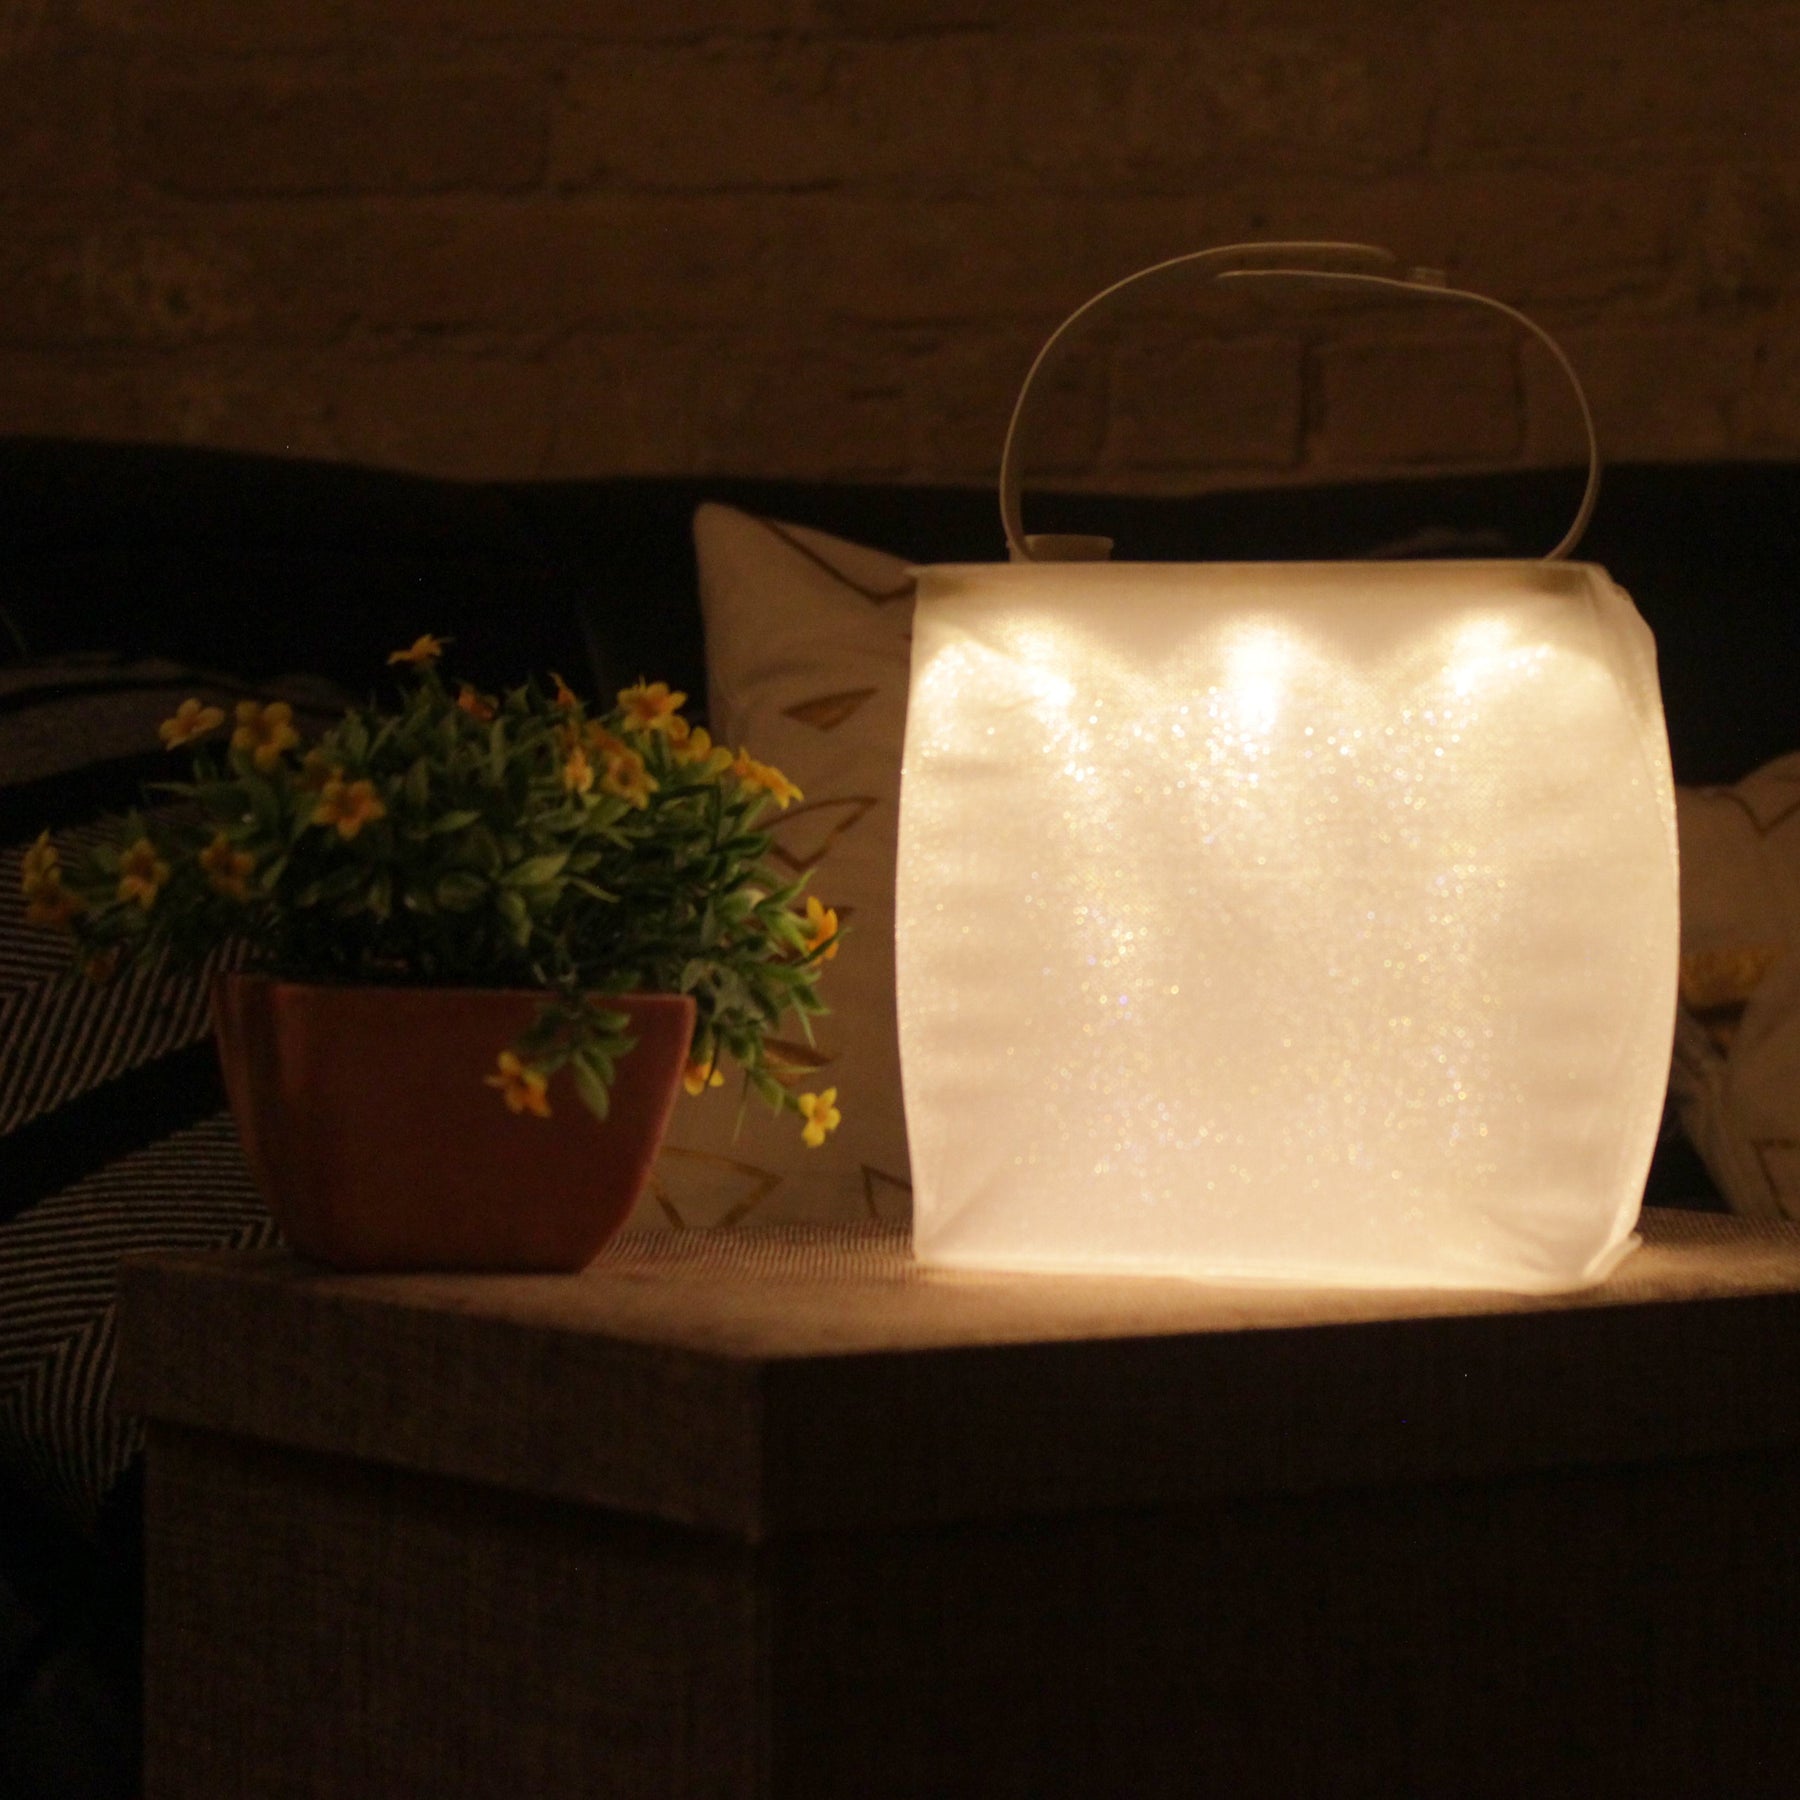 Firefly power lantern lights up the area with a warm white.